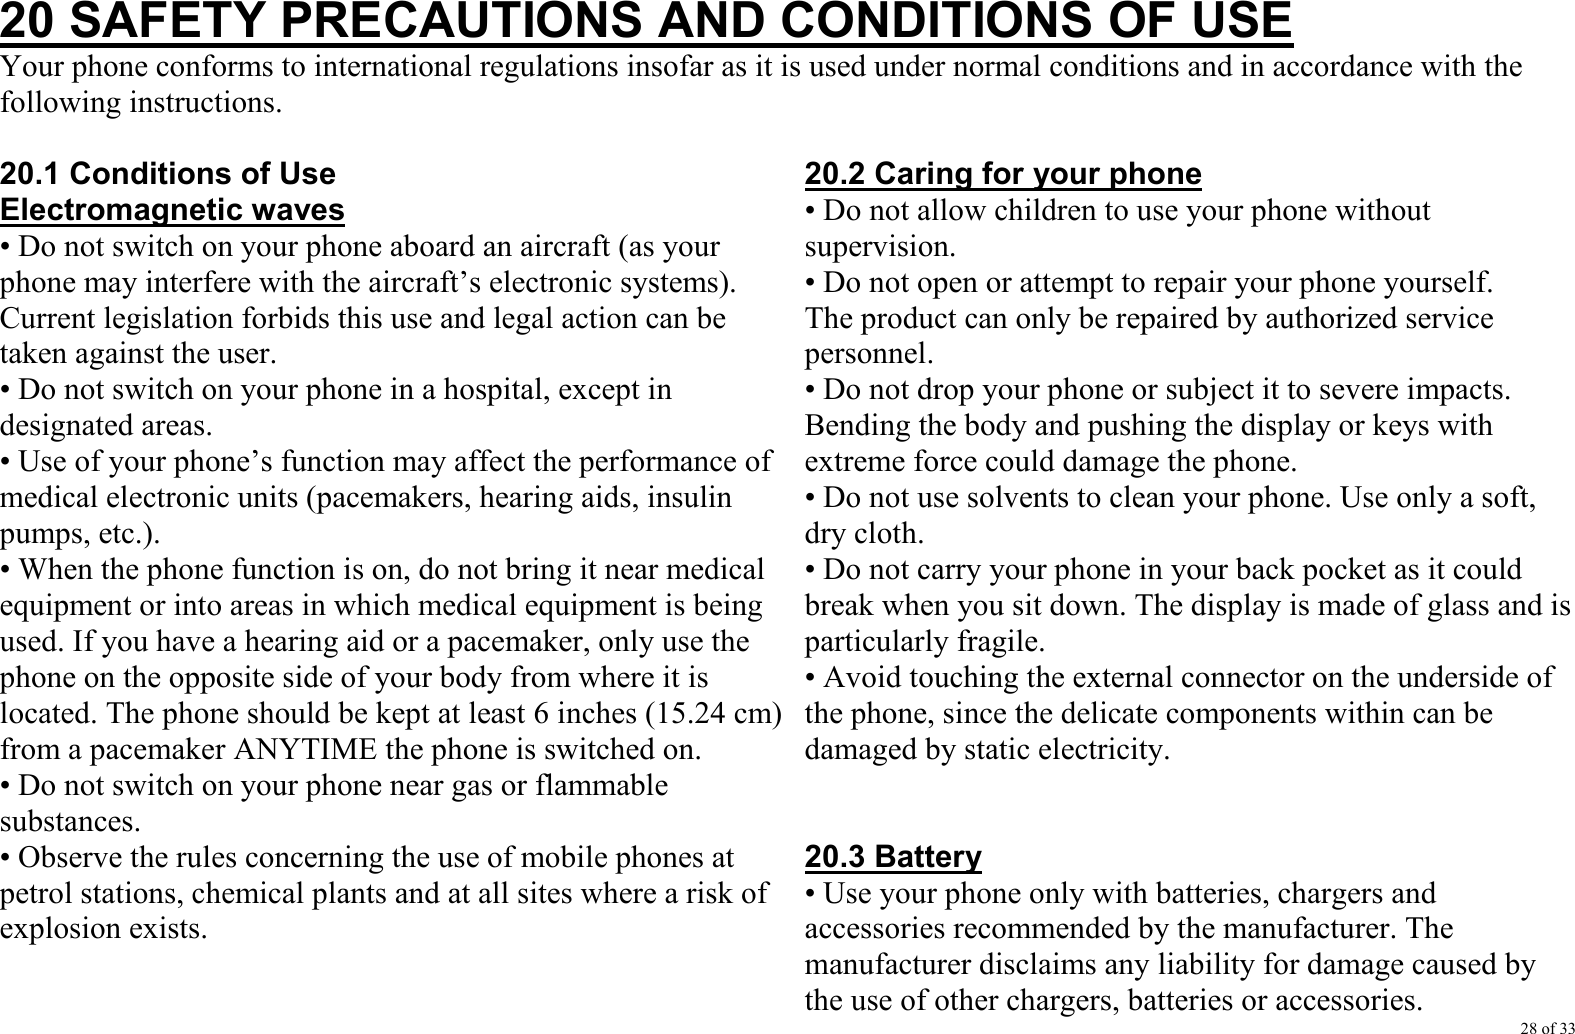 28 of 33 20 SAFETY PRECAUTIONS AND CONDITIONS OF USE Your phone conforms to international regulations insofar as it is used under normal conditions and in accordance with the following instructions.  20.1 Conditions of Use Electromagnetic waves • Do not switch on your phone aboard an aircraft (as your phone may interfere with the aircraft’s electronic systems). Current legislation forbids this use and legal action can be taken against the user. • Do not switch on your phone in a hospital, except in designated areas. • Use of your phone’s function may affect the performance of medical electronic units (pacemakers, hearing aids, insulin pumps, etc.). • When the phone function is on, do not bring it near medical equipment or into areas in which medical equipment is being used. If you have a hearing aid or a pacemaker, only use the phone on the opposite side of your body from where it is located. The phone should be kept at least 6 inches (15.24 cm) from a pacemaker ANYTIME the phone is switched on. • Do not switch on your phone near gas or flammable substances. • Observe the rules concerning the use of mobile phones at petrol stations, chemical plants and at all sites where a risk of explosion exists.    20.2 Caring for your phone • Do not allow children to use your phone without supervision. • Do not open or attempt to repair your phone yourself. The product can only be repaired by authorized service personnel. • Do not drop your phone or subject it to severe impacts. Bending the body and pushing the display or keys with extreme force could damage the phone. • Do not use solvents to clean your phone. Use only a soft, dry cloth. • Do not carry your phone in your back pocket as it could break when you sit down. The display is made of glass and is particularly fragile. • Avoid touching the external connector on the underside of the phone, since the delicate components within can be damaged by static electricity.   20.3 Battery • Use your phone only with batteries, chargers and accessories recommended by the manufacturer. The manufacturer disclaims any liability for damage caused by the use of other chargers, batteries or accessories. 